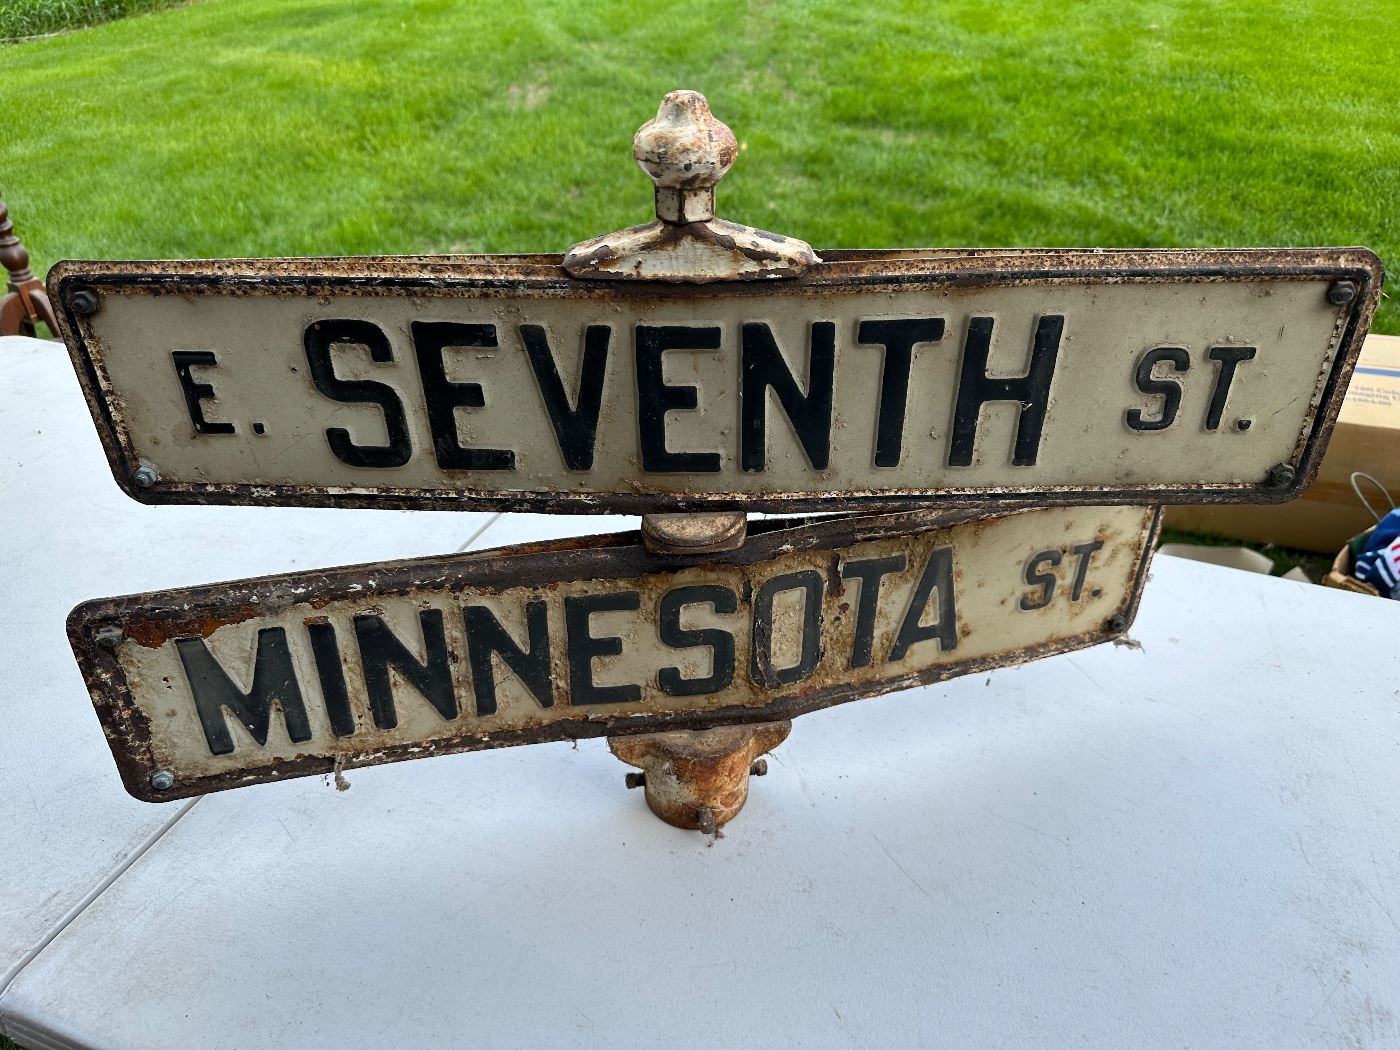 Double-sided street sign -- so awesome!!!